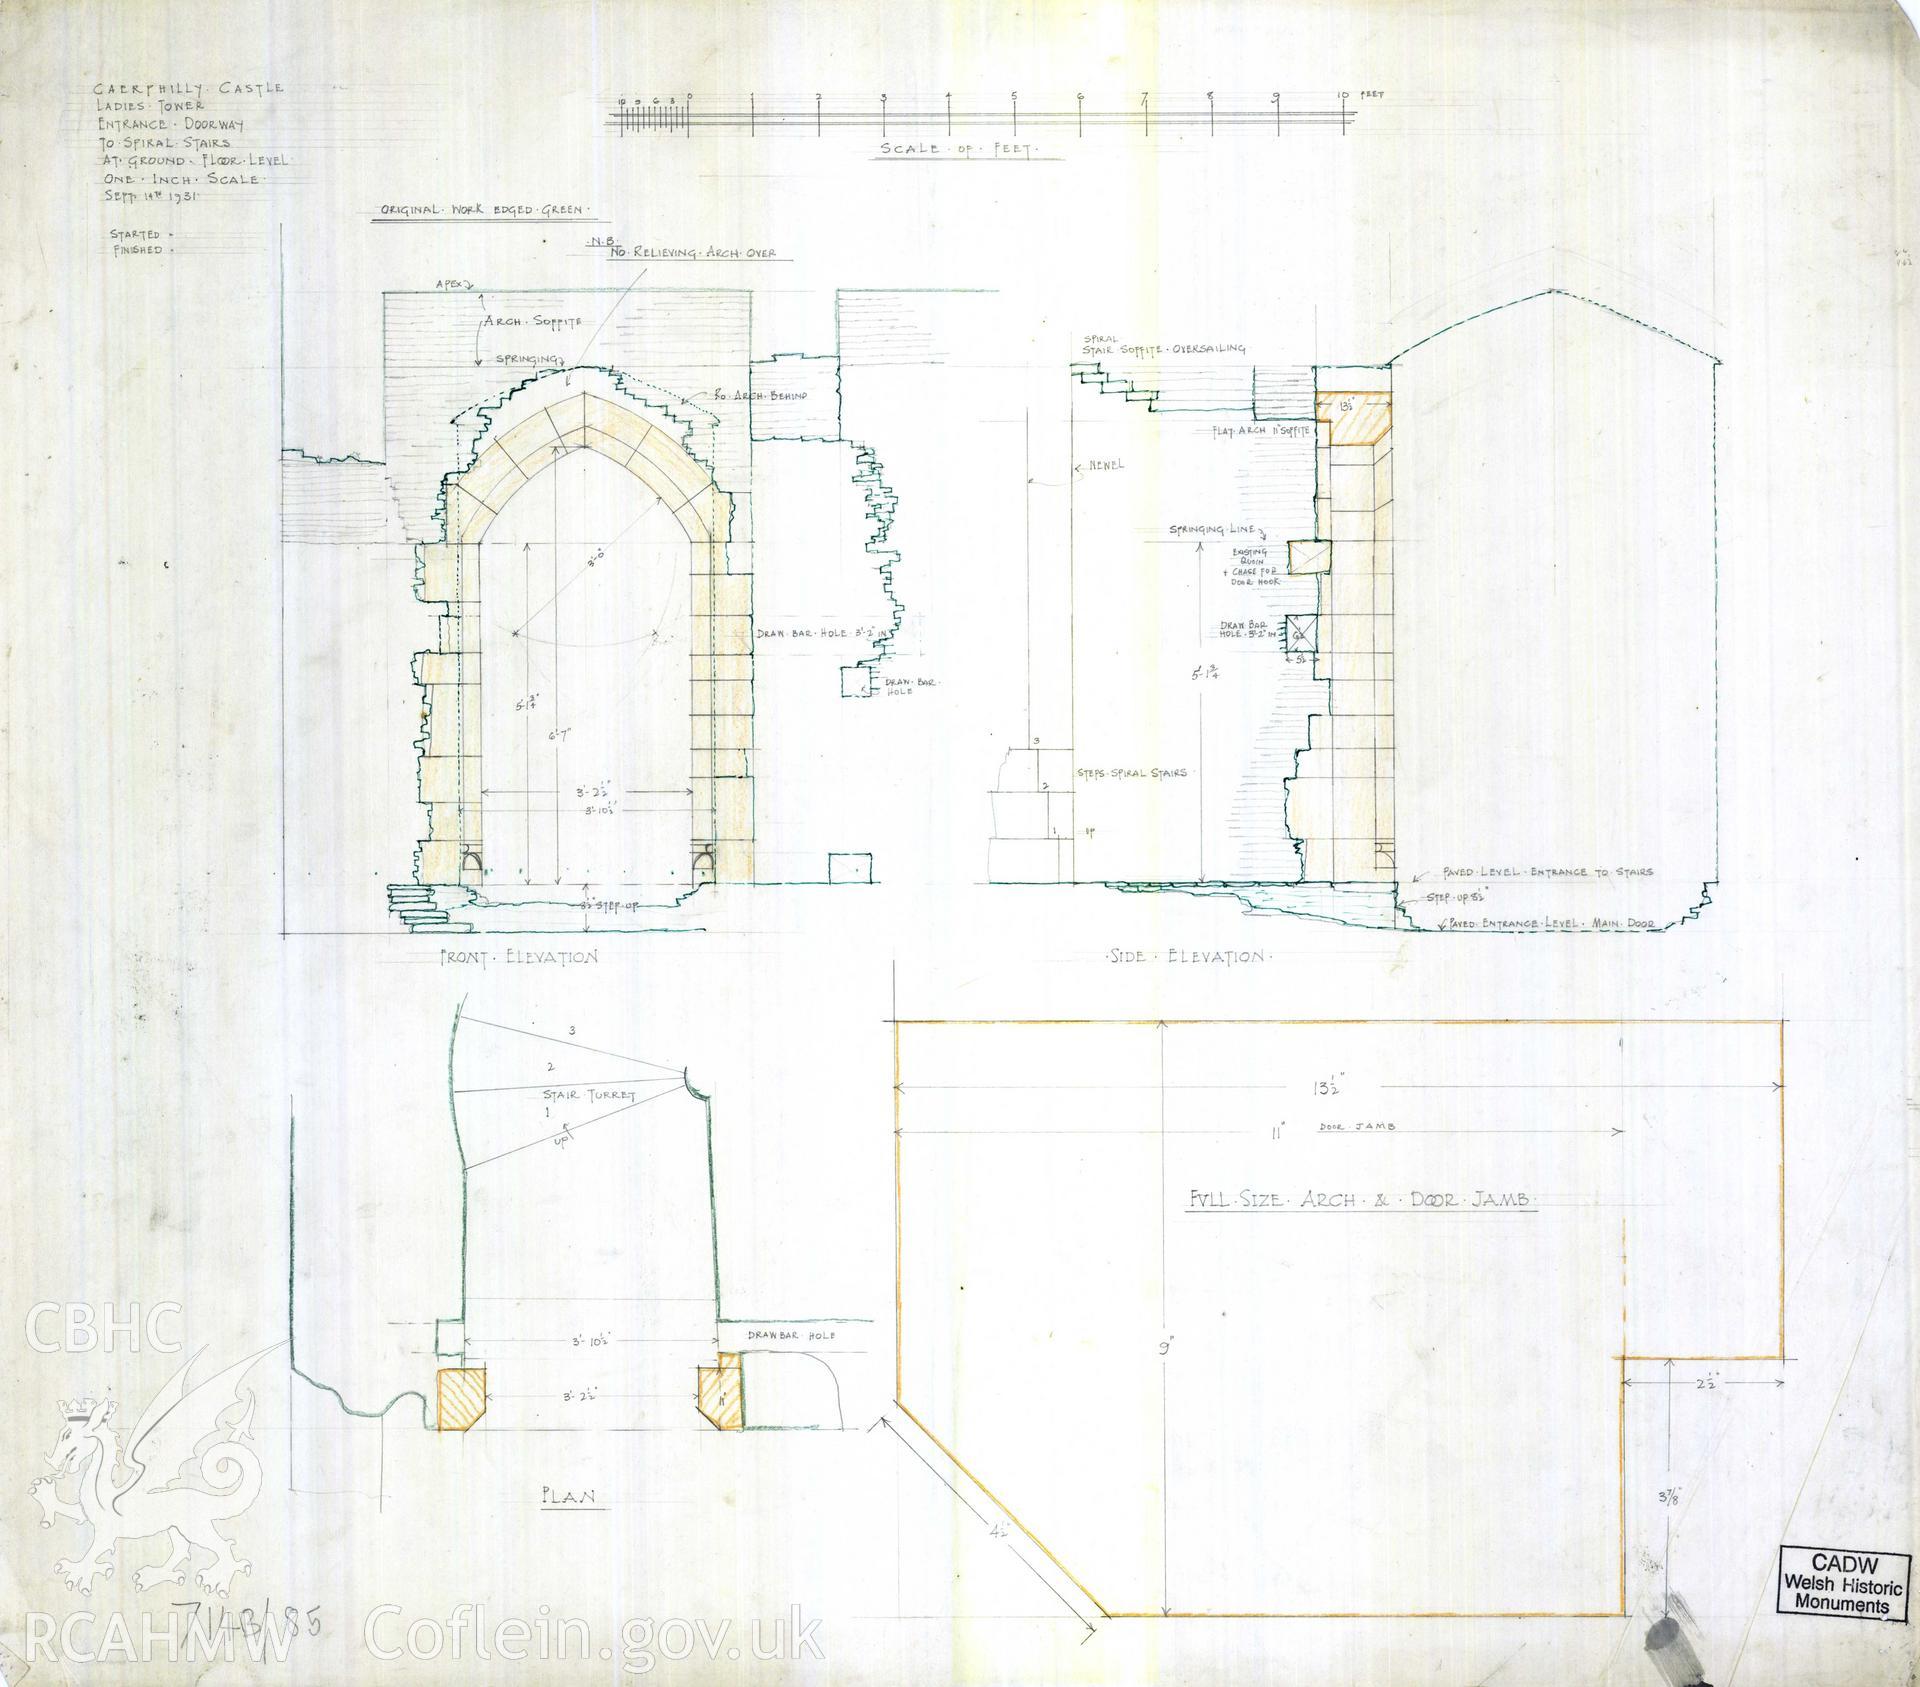 Digital copy of Cadw guardianship monument drawing of Caerphilly Castle. NW tower, gr fl, door to stairs. Cadw ref. no: 714B/85. Scale 1:12.1. Original drawing withdrawn and returned to Cadw at their request.